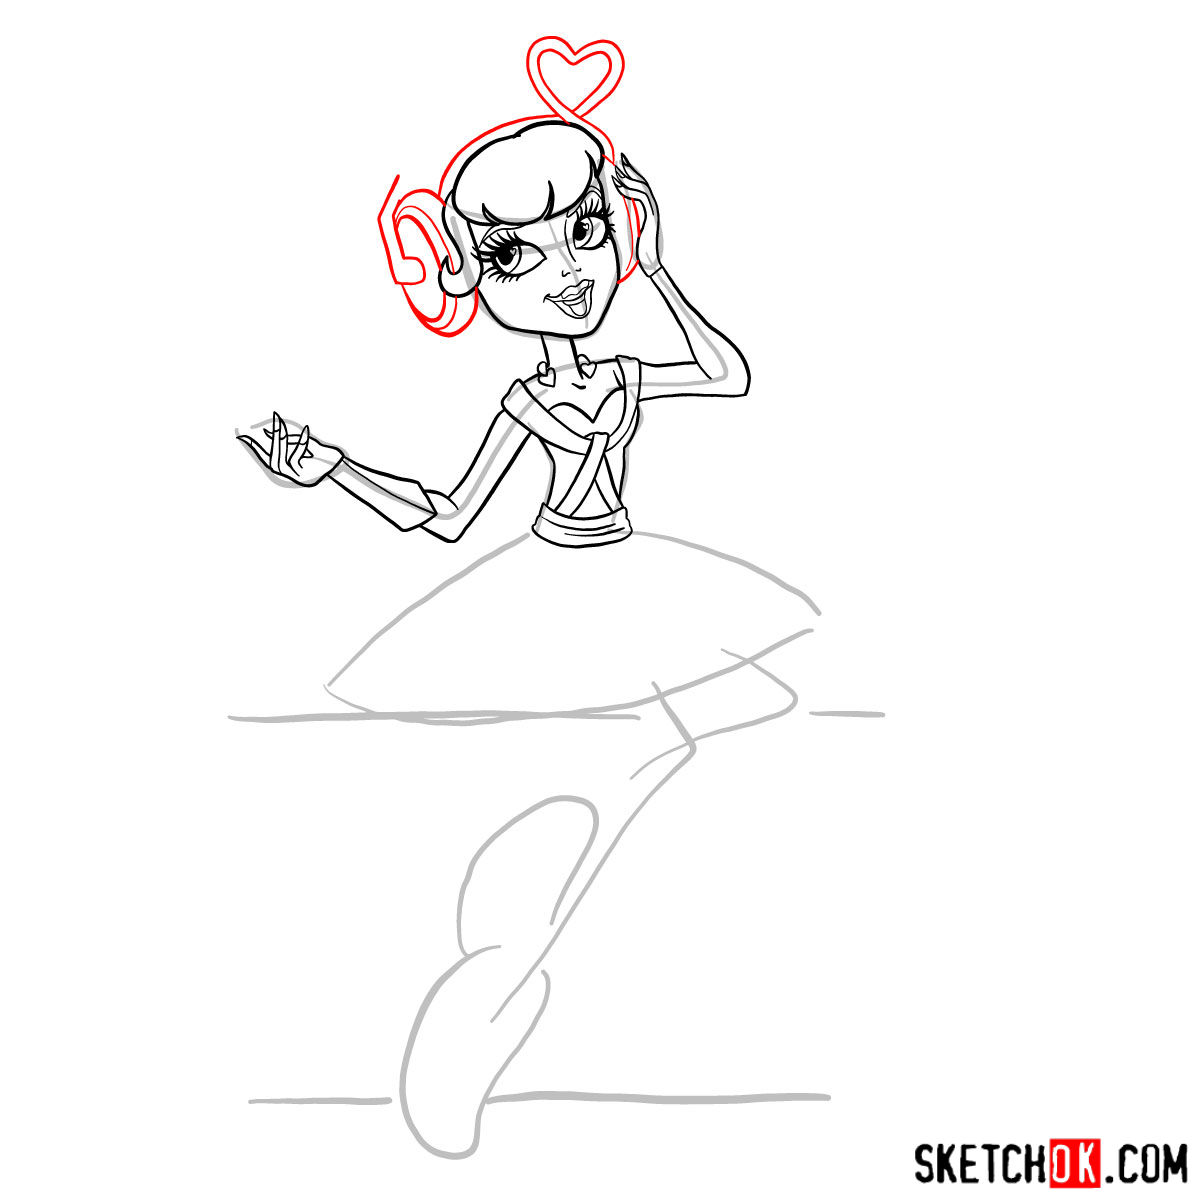 How to draw C.A. Cupid step by step - step 10